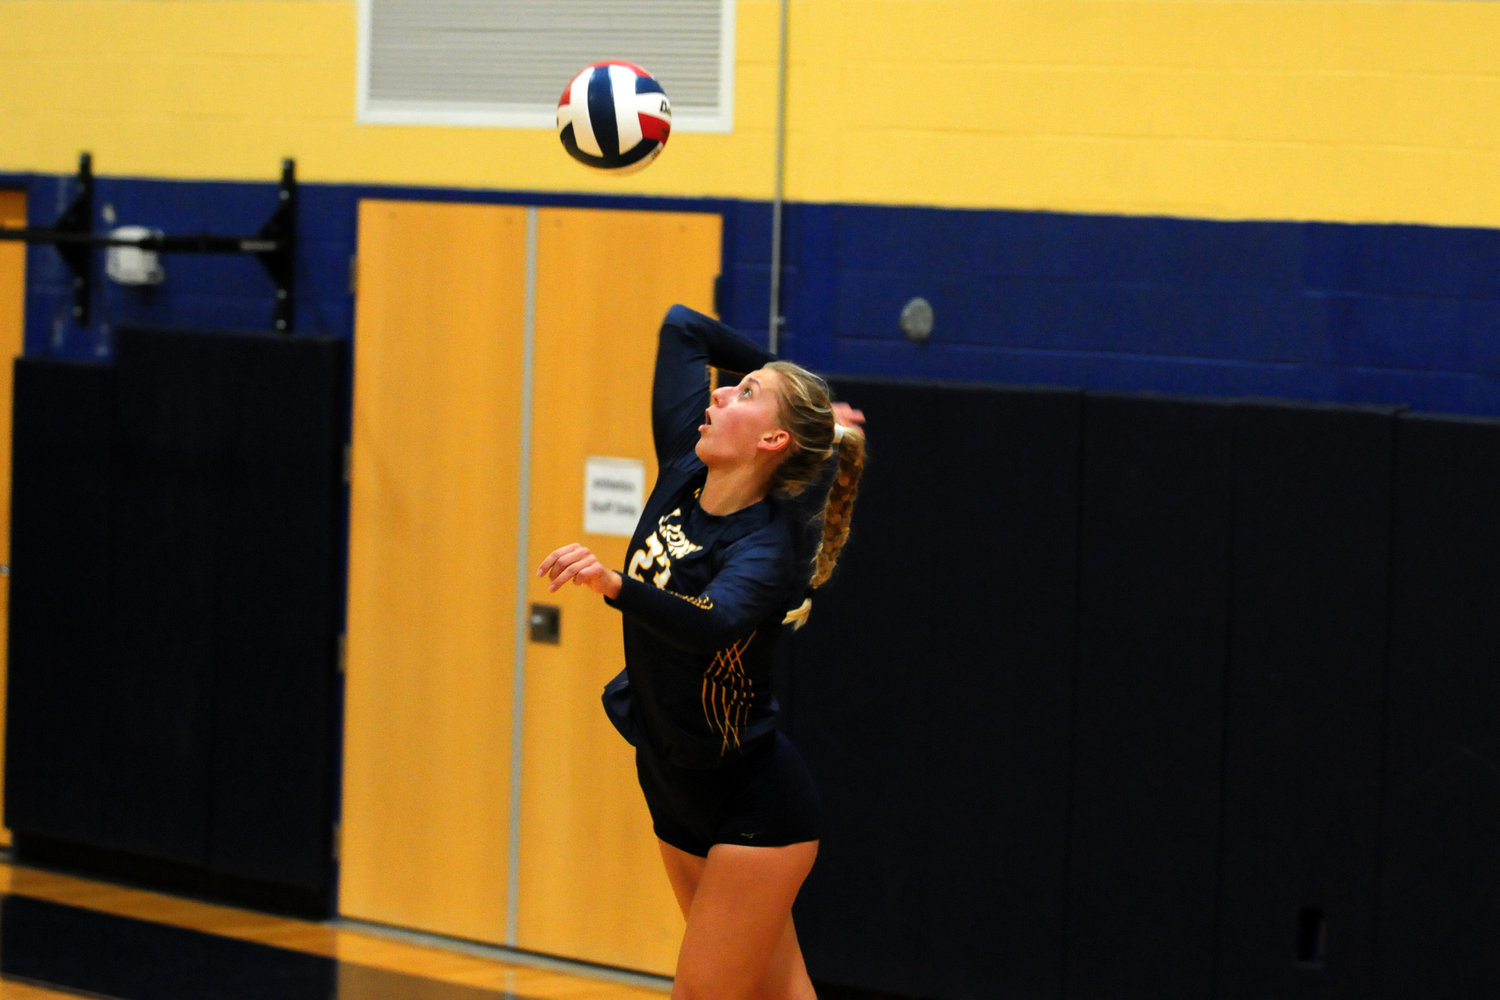 New Hope-Solebury senior Mia Chuma served up eight aces and 13
kills in last week’s 3-0 sweep of Upper Dublin. With the win the Lions advanced to 8-3 overall, 5-1 in the SOL American Conference.